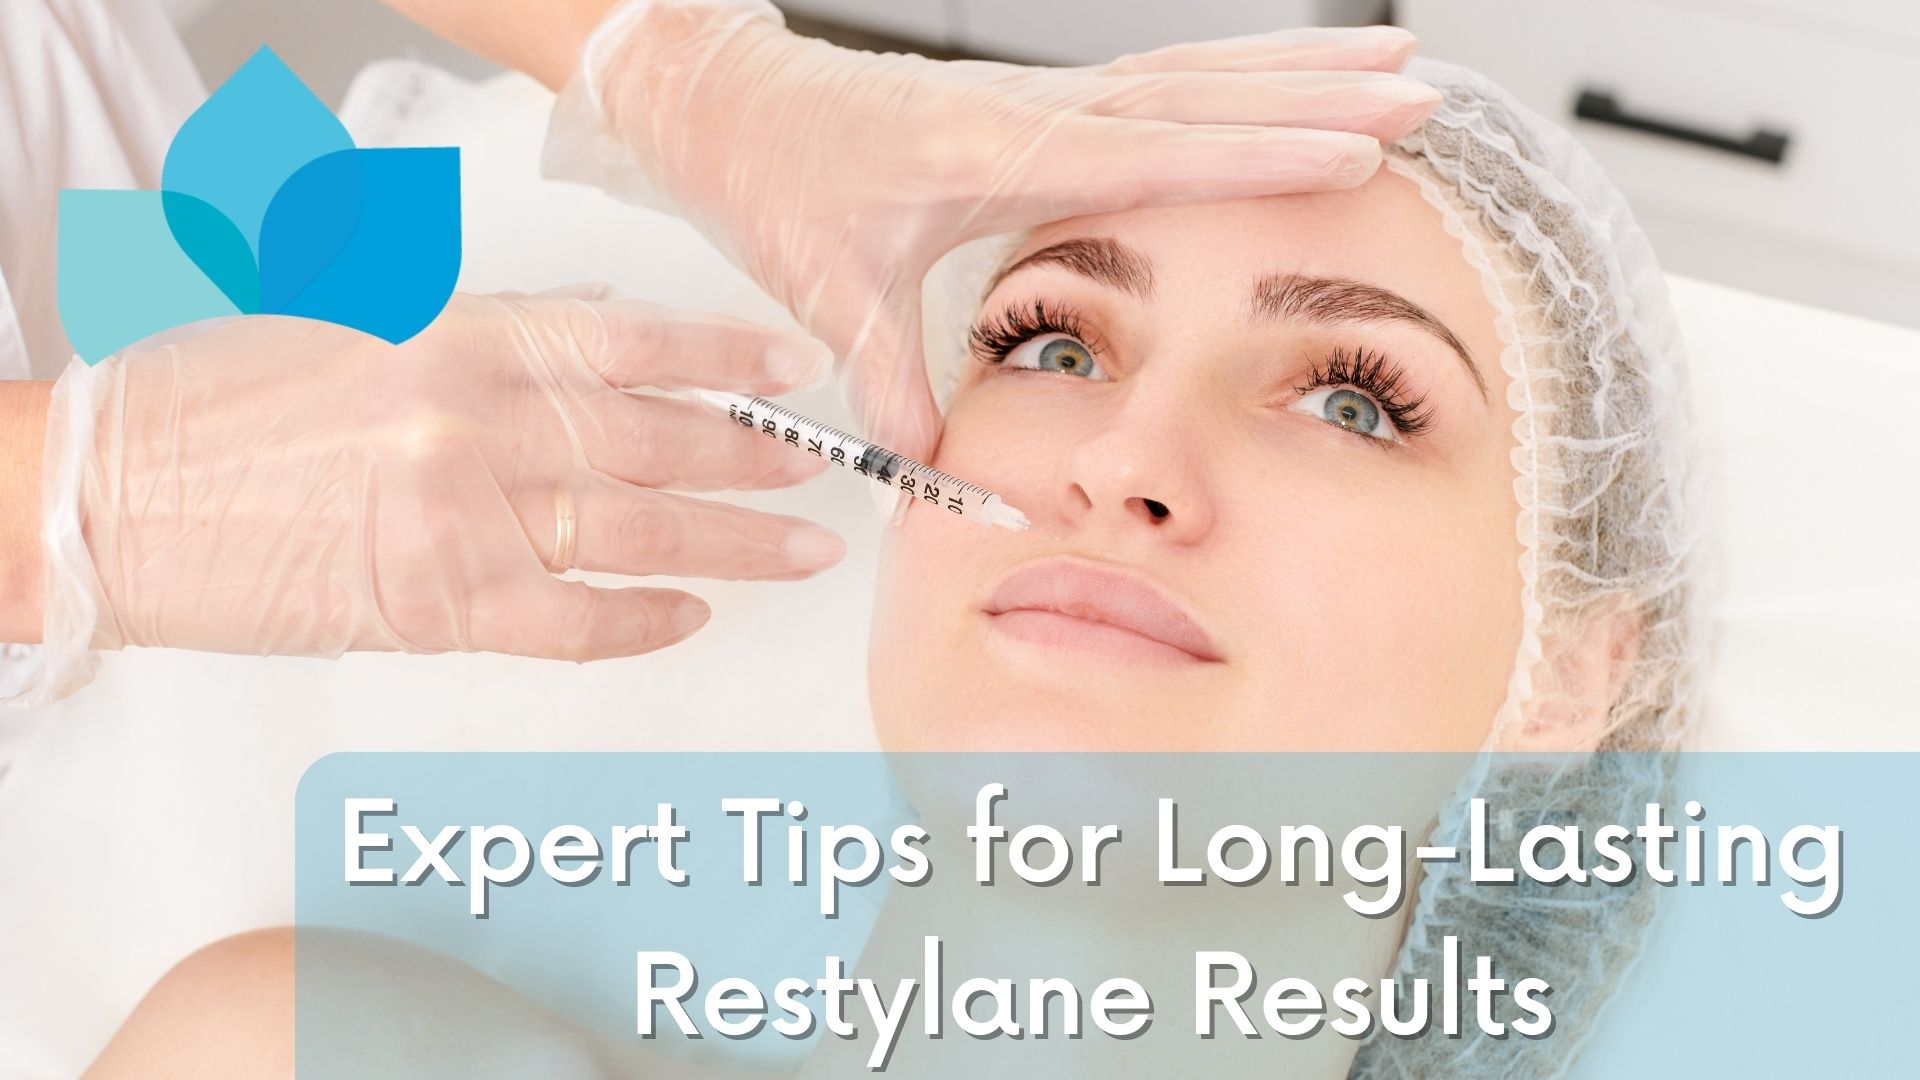 Expert Tips for Long-Lasting Restylane Results in Edmonton